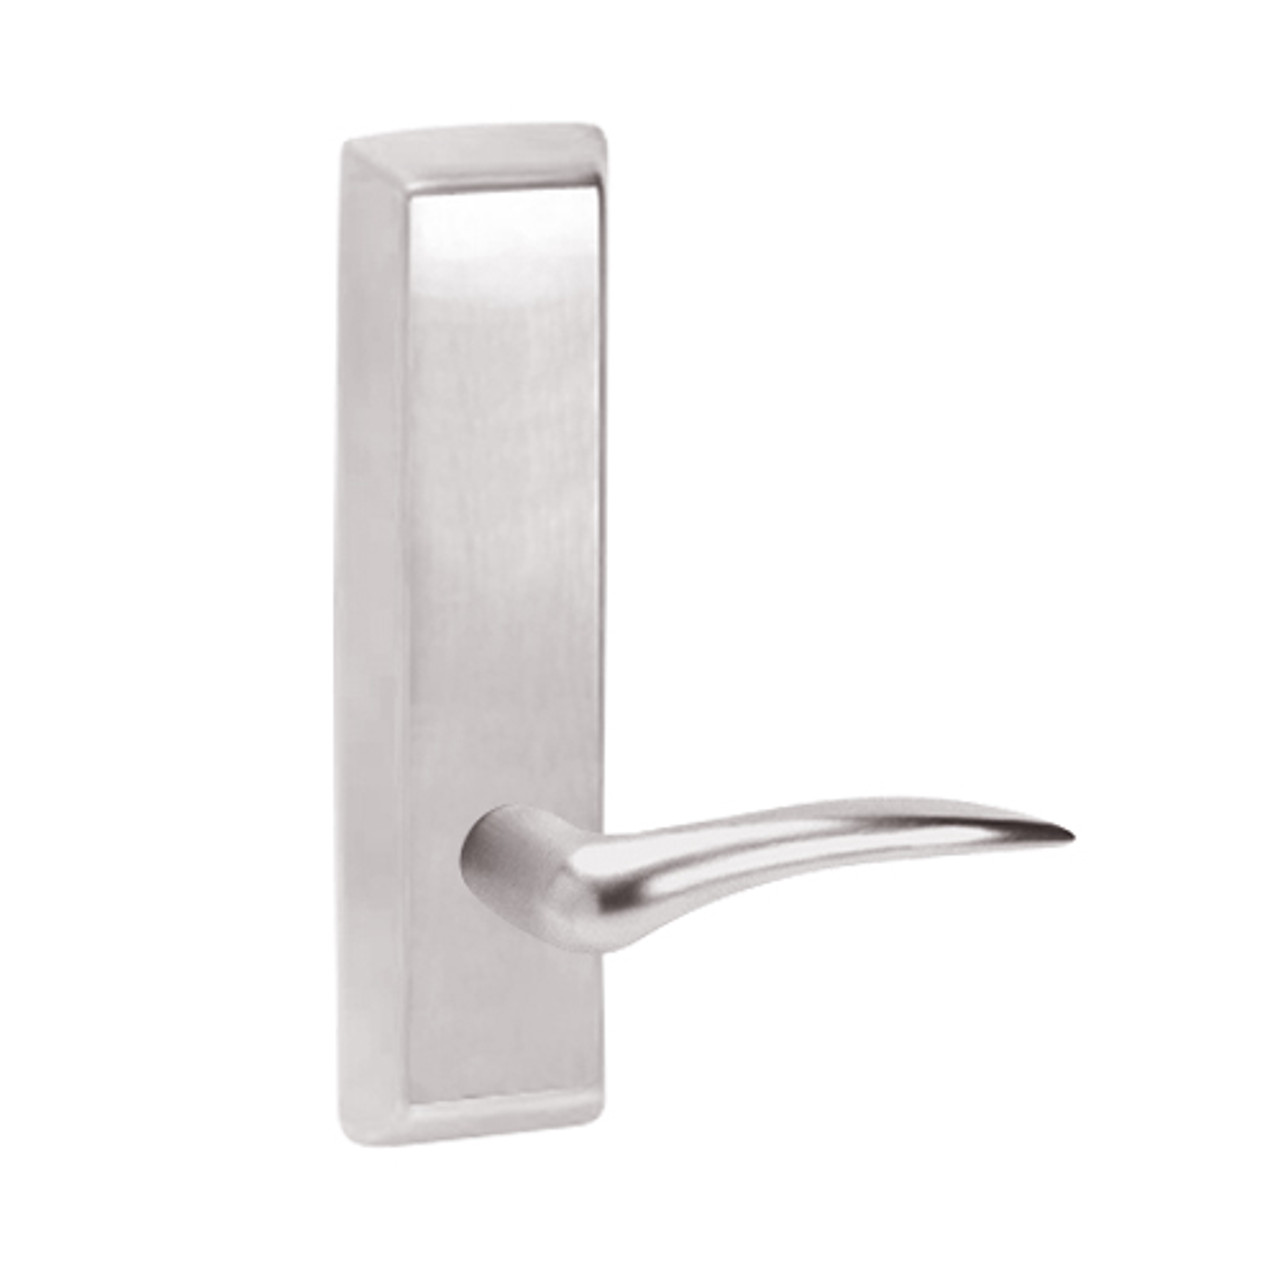 D955-629-RHR Corbin ED5000 Series Exit Device Trim with Classroom Dirke Lever in Bright Stainless Steel Finish